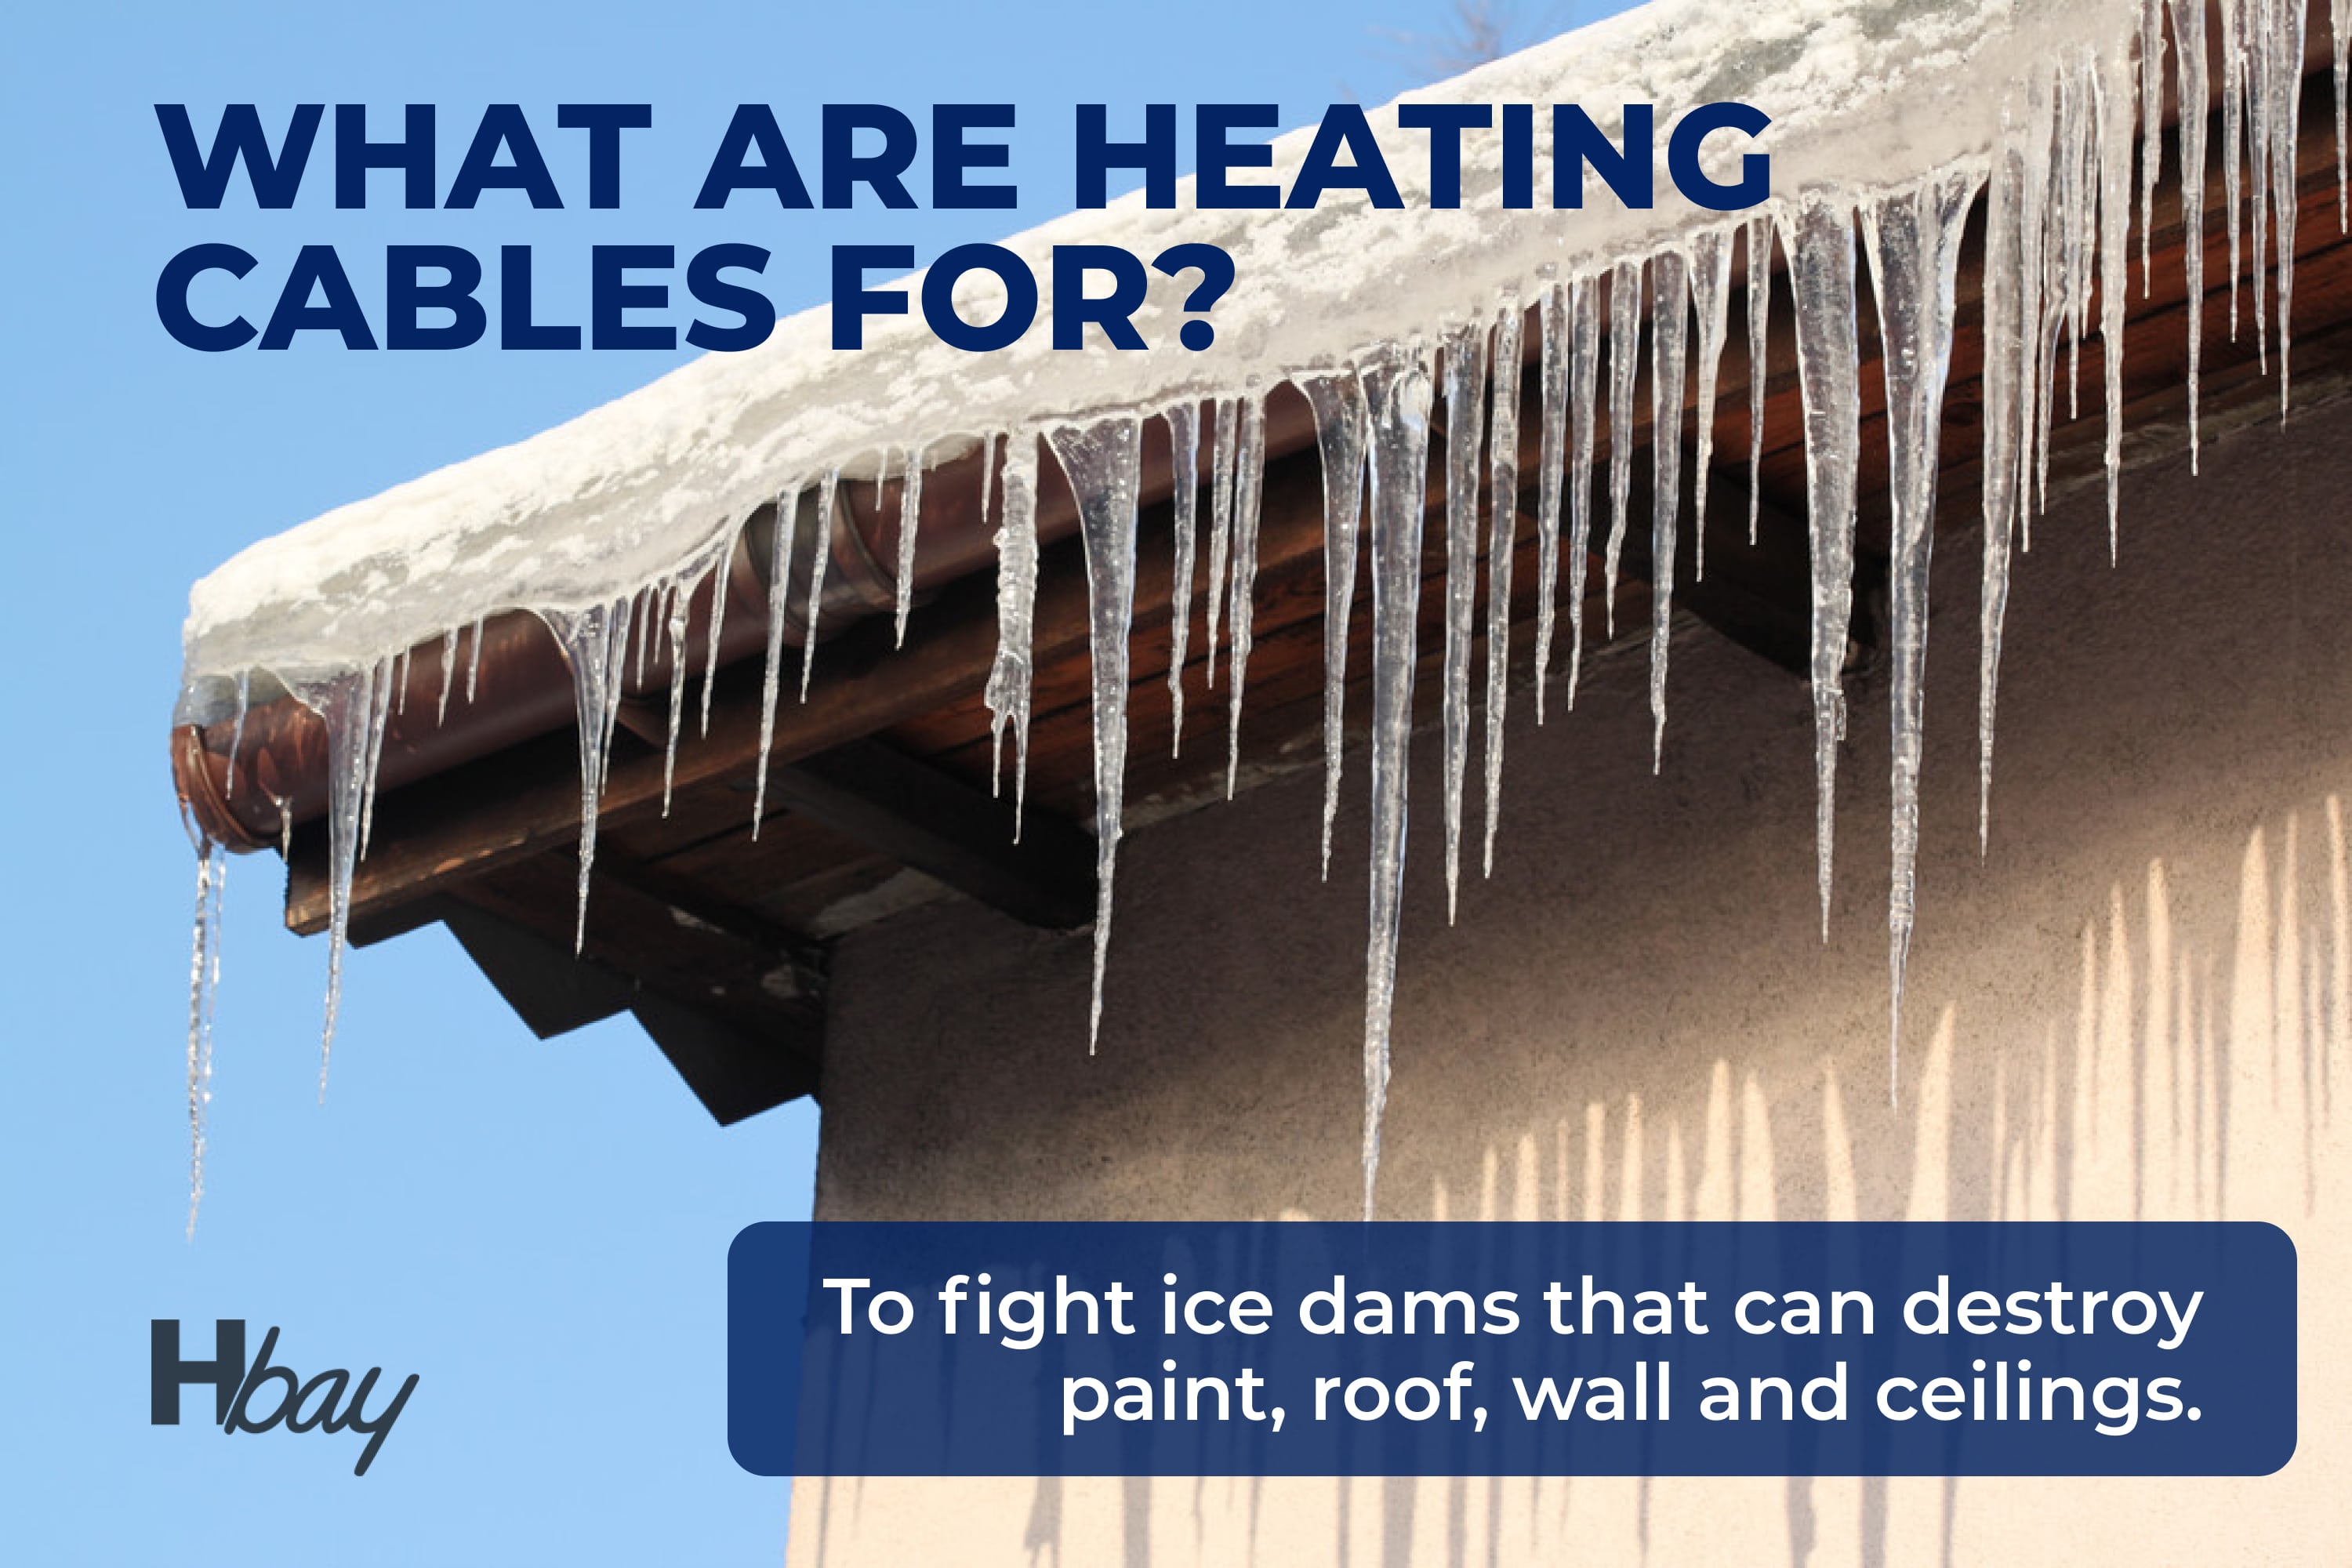 How Long Can You Leave Ice Dam Heating Cables Turned On